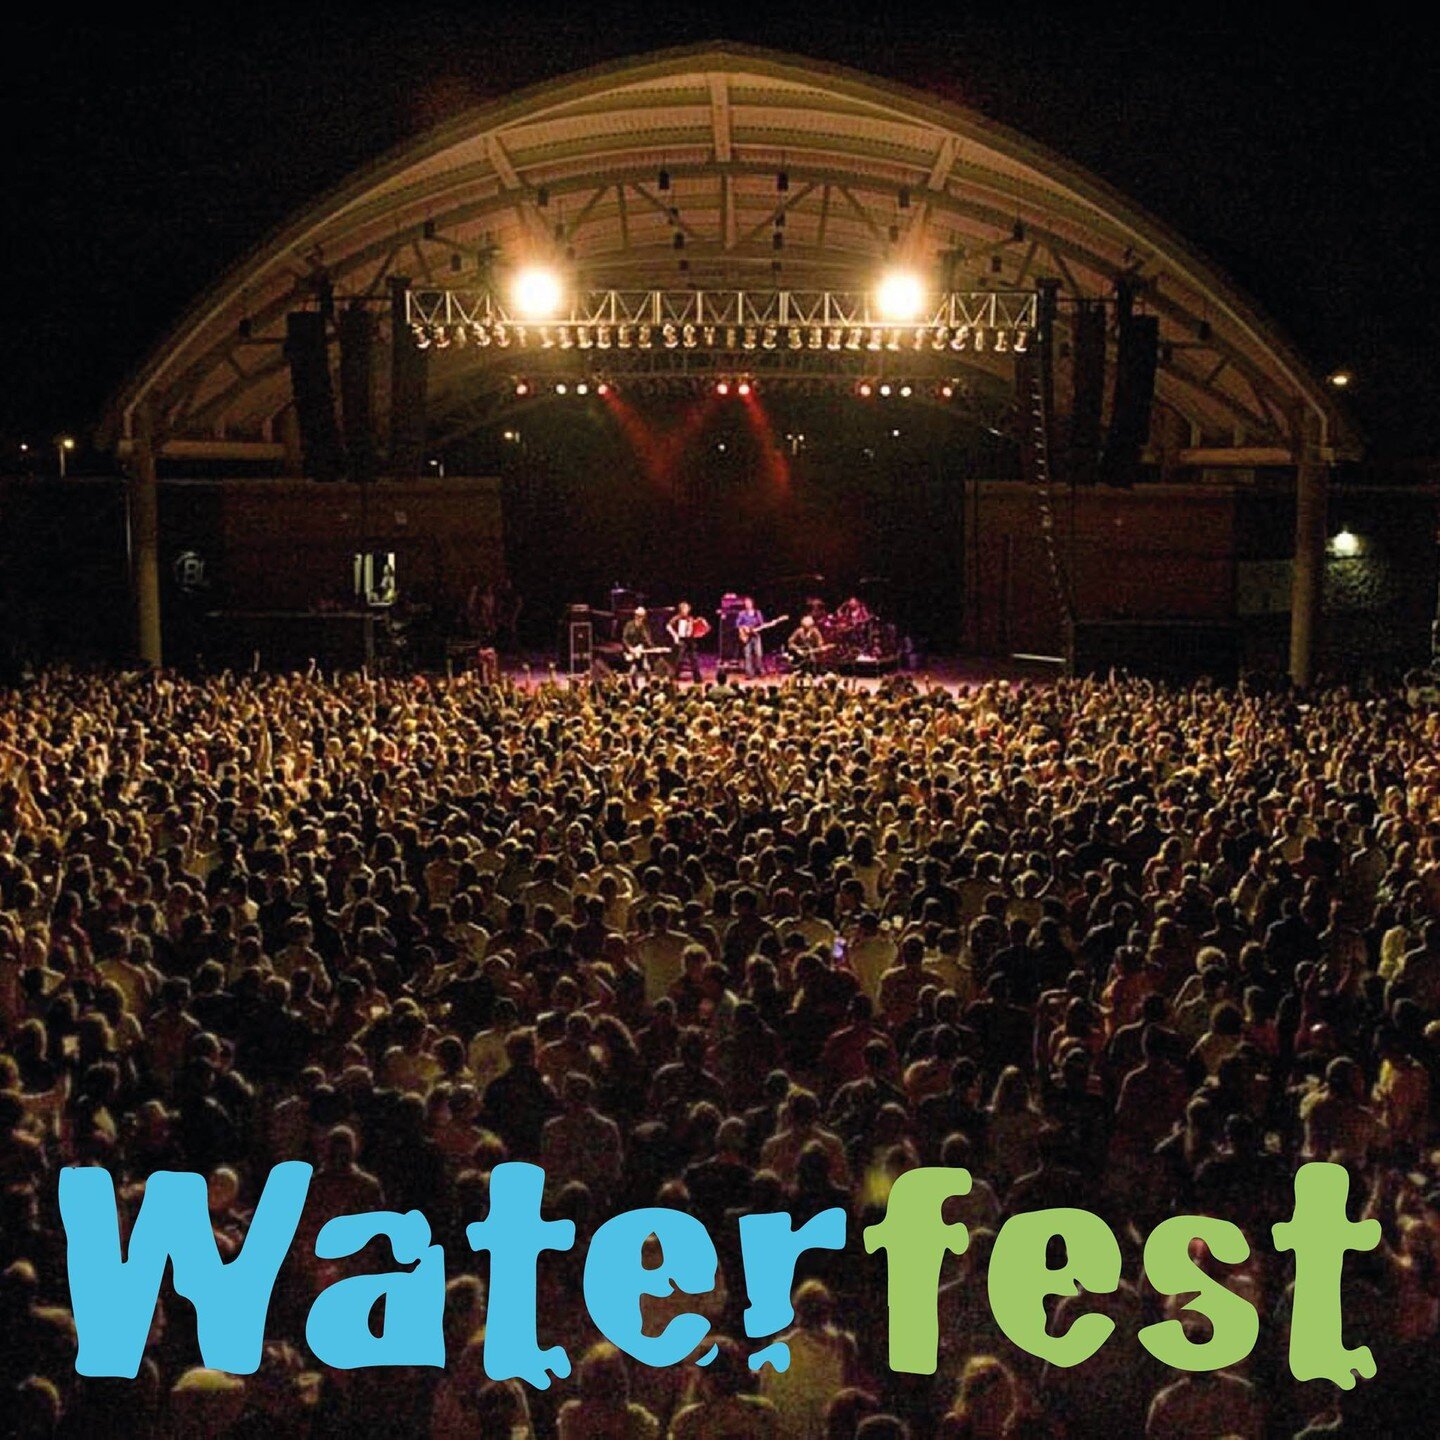 𝙒𝙚 𝙣𝙚𝙚𝙙 𝙮𝙤𝙪𝙧 𝙝𝙚𝙡𝙥!

On this coming Thursday, July 14th, the Oshkosh West Bands will be running concessions and parking for Waterfest at the Leach Amphitheater &mdash; we need help, and lots of it! We have been selected for one of the bi